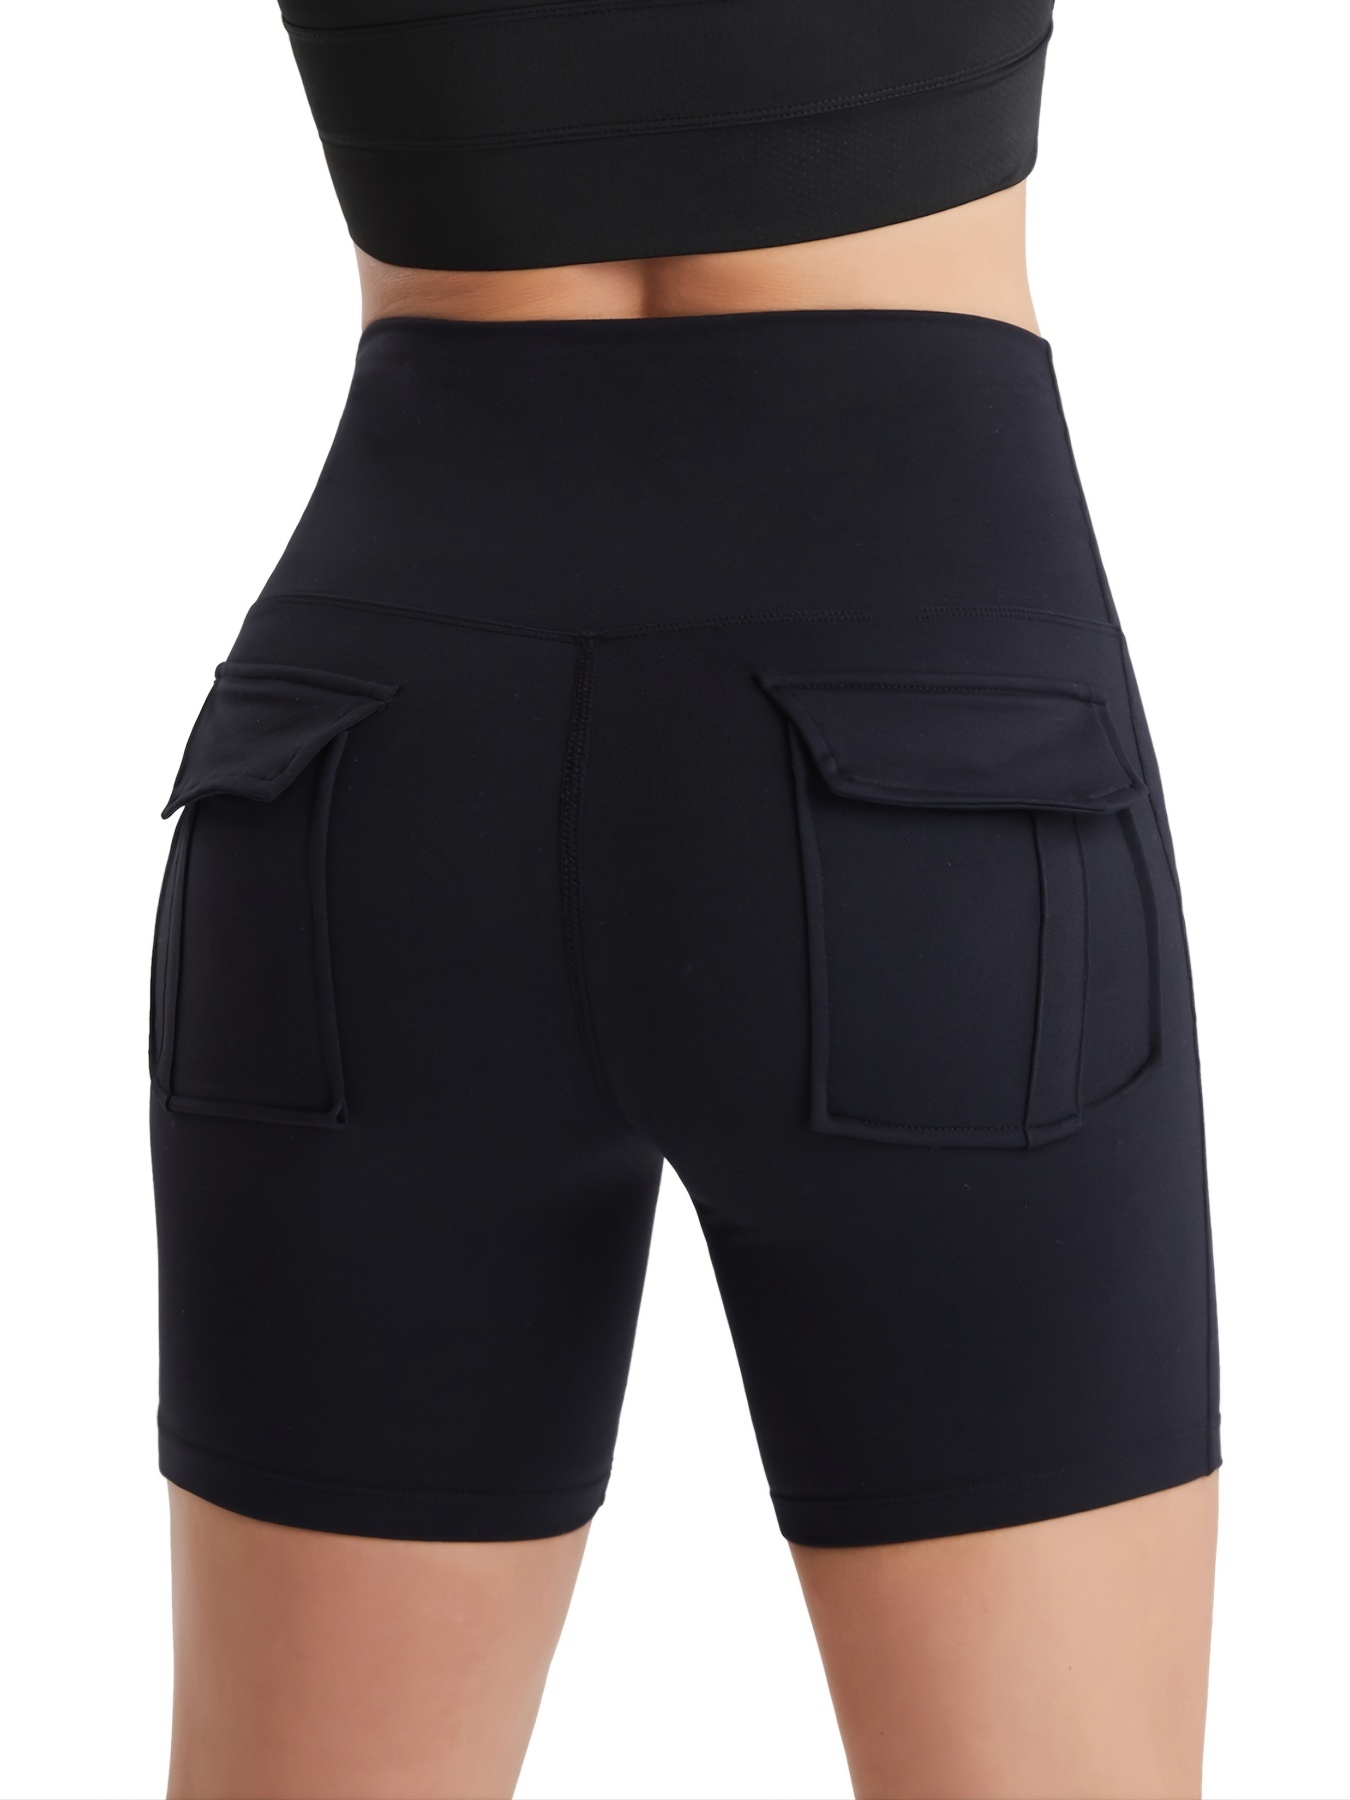  Women's Shorts Solid Wideband Waist Flap Detail Running  Athletic Yoga Sports Shorts Shorts for Women (Color : Black, Size :  X-Large) : Clothing, Shoes & Jewelry